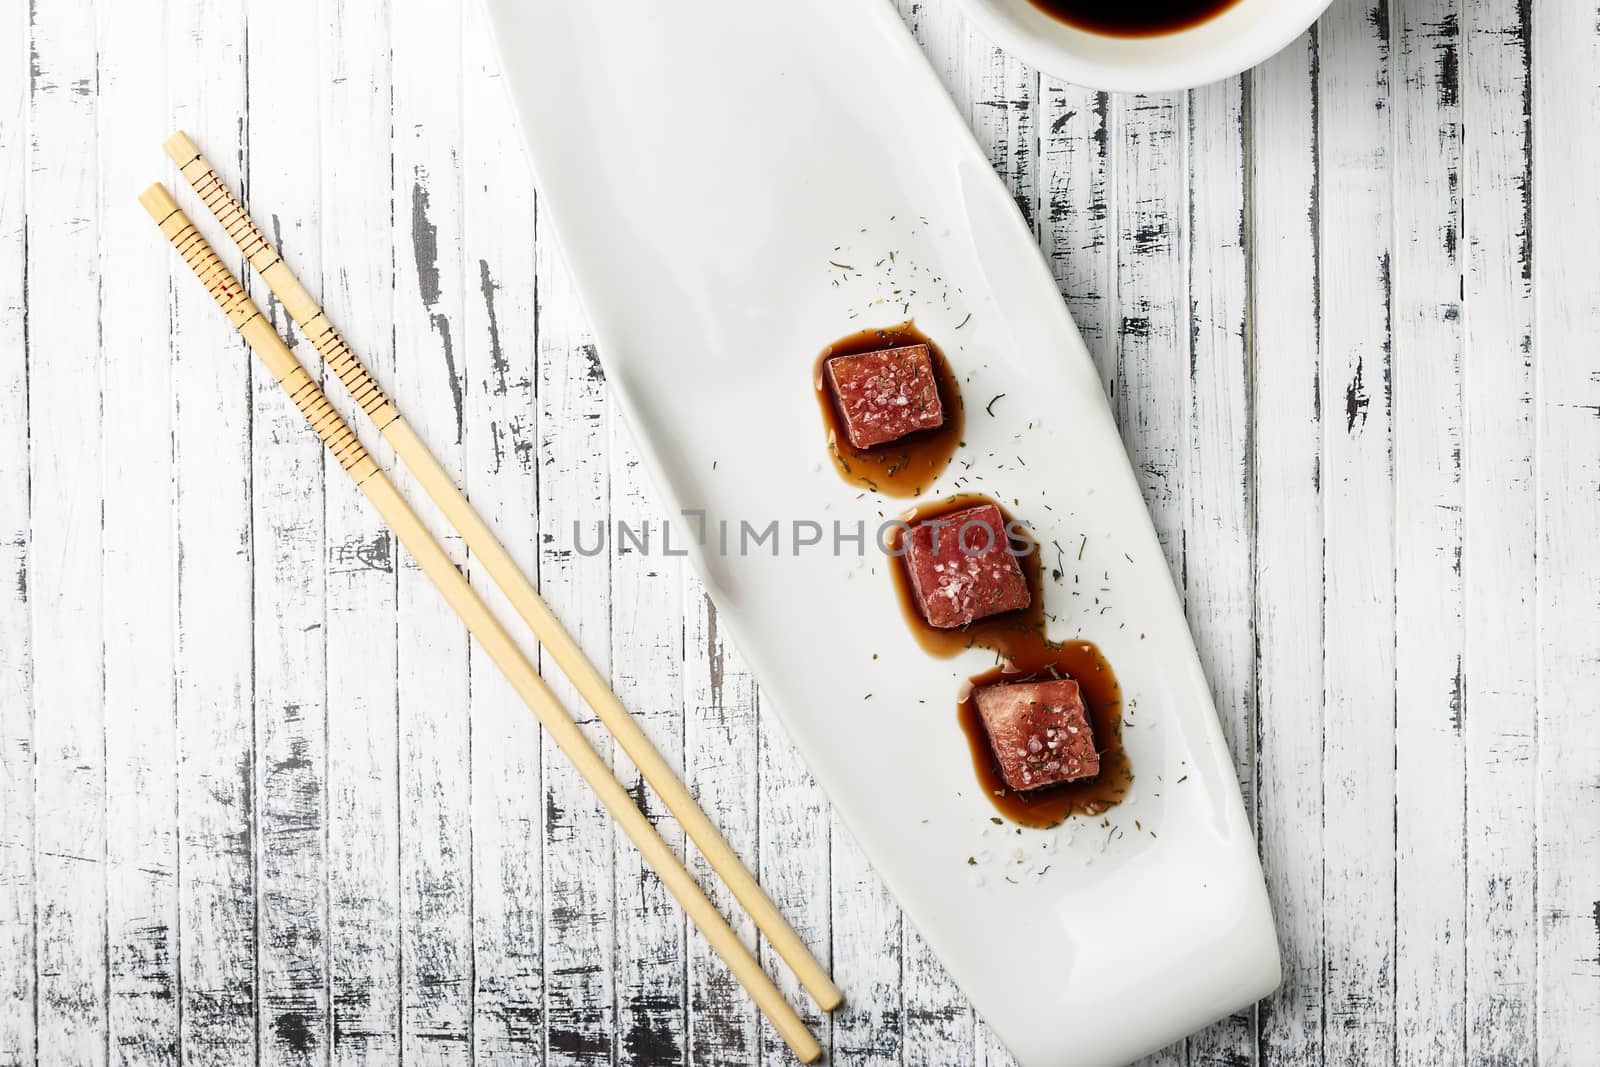 Tuna sashimi dipped in soy sauce,  thick salt and dill on old white wooden board with chopsticks and sauce bowl. Viewed from above. Raw fish in traditional Japanese style. Horizontal image.